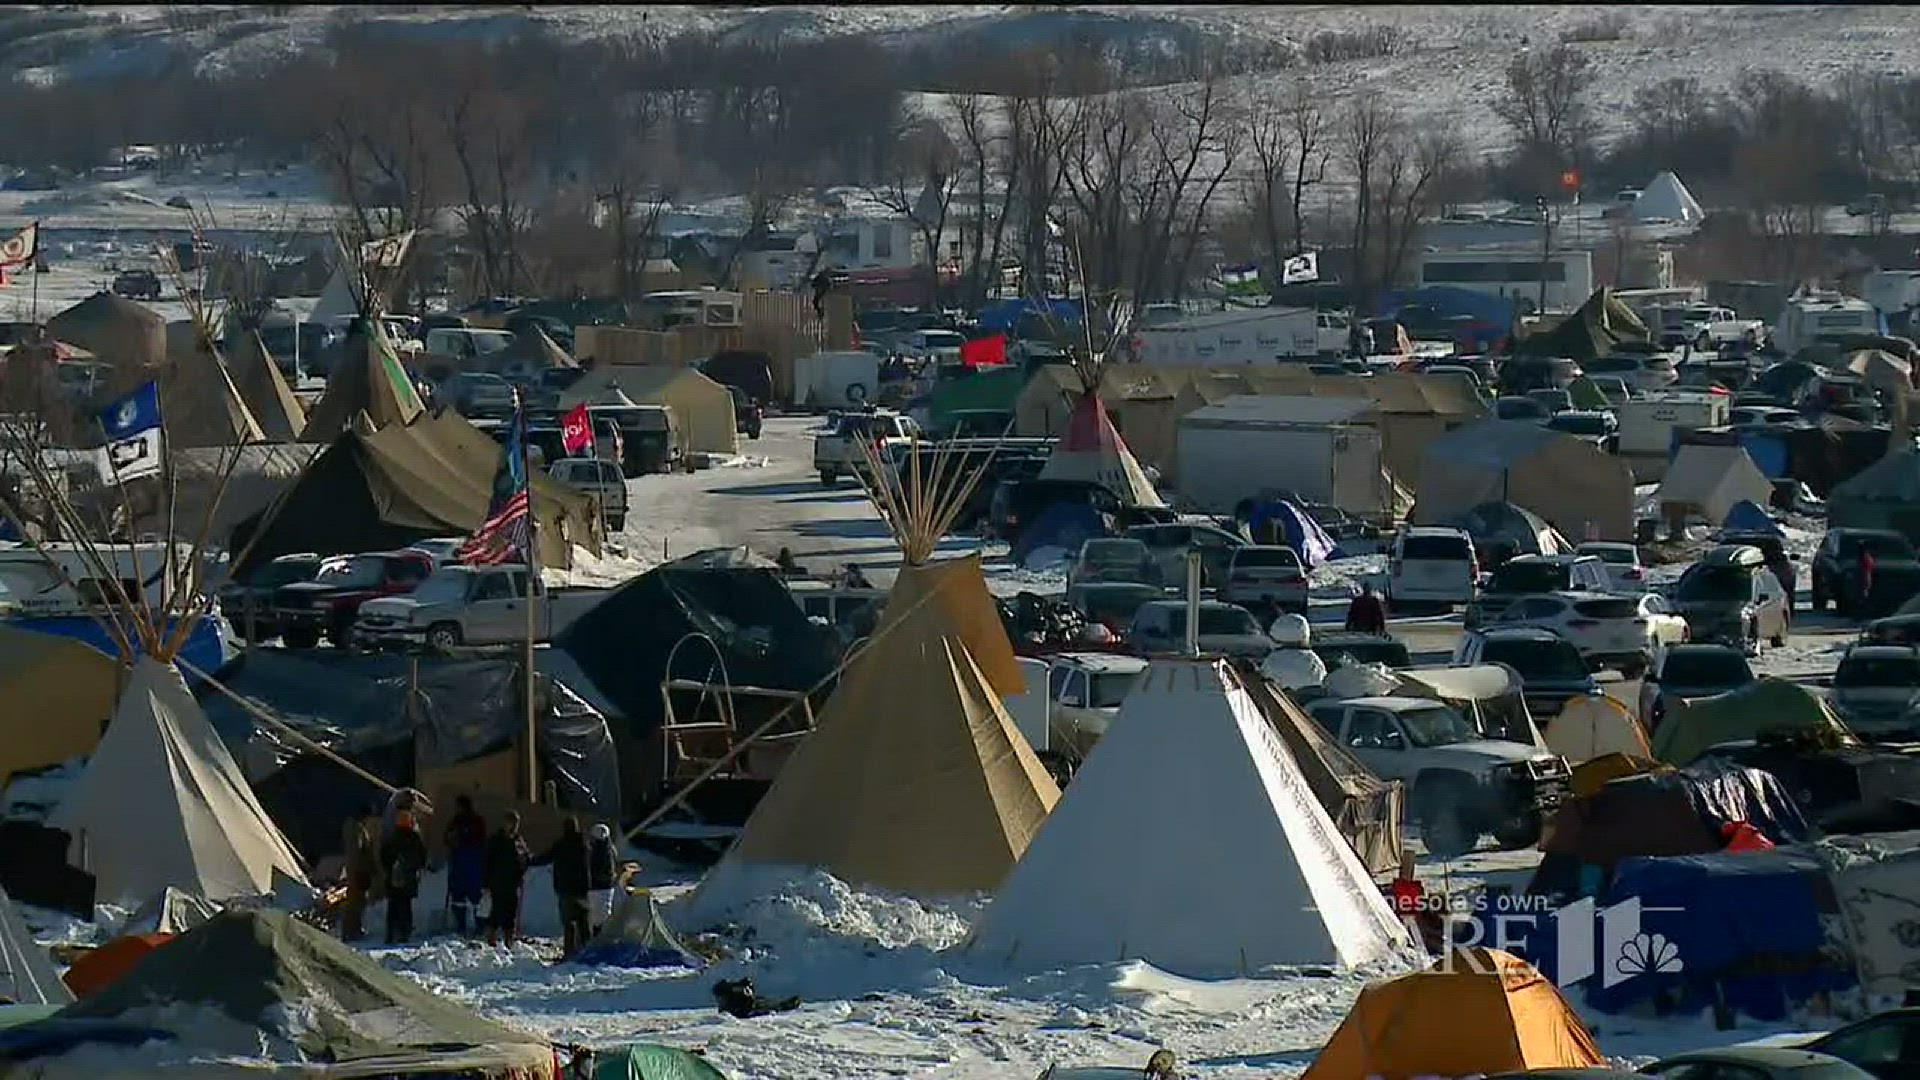 Tribal leader: Pipeline opponents should go home